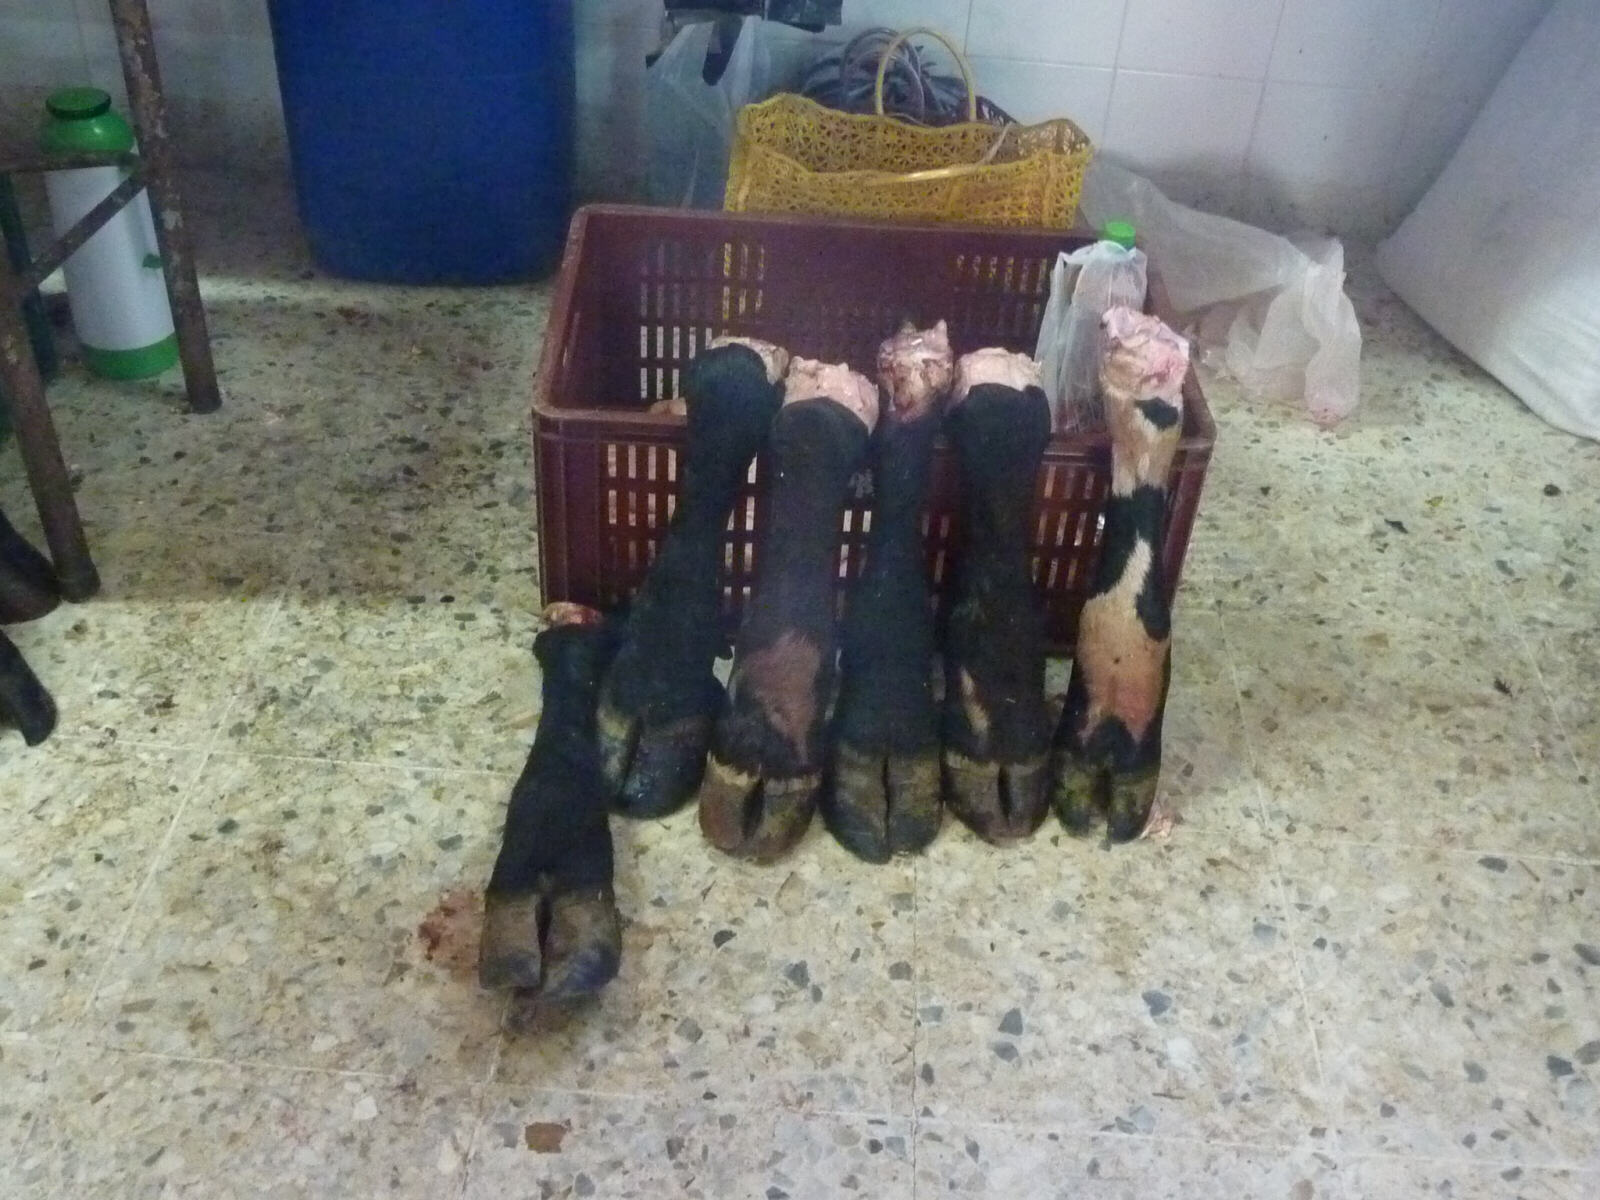 Cows' feet in Silvia meat market, Colombia